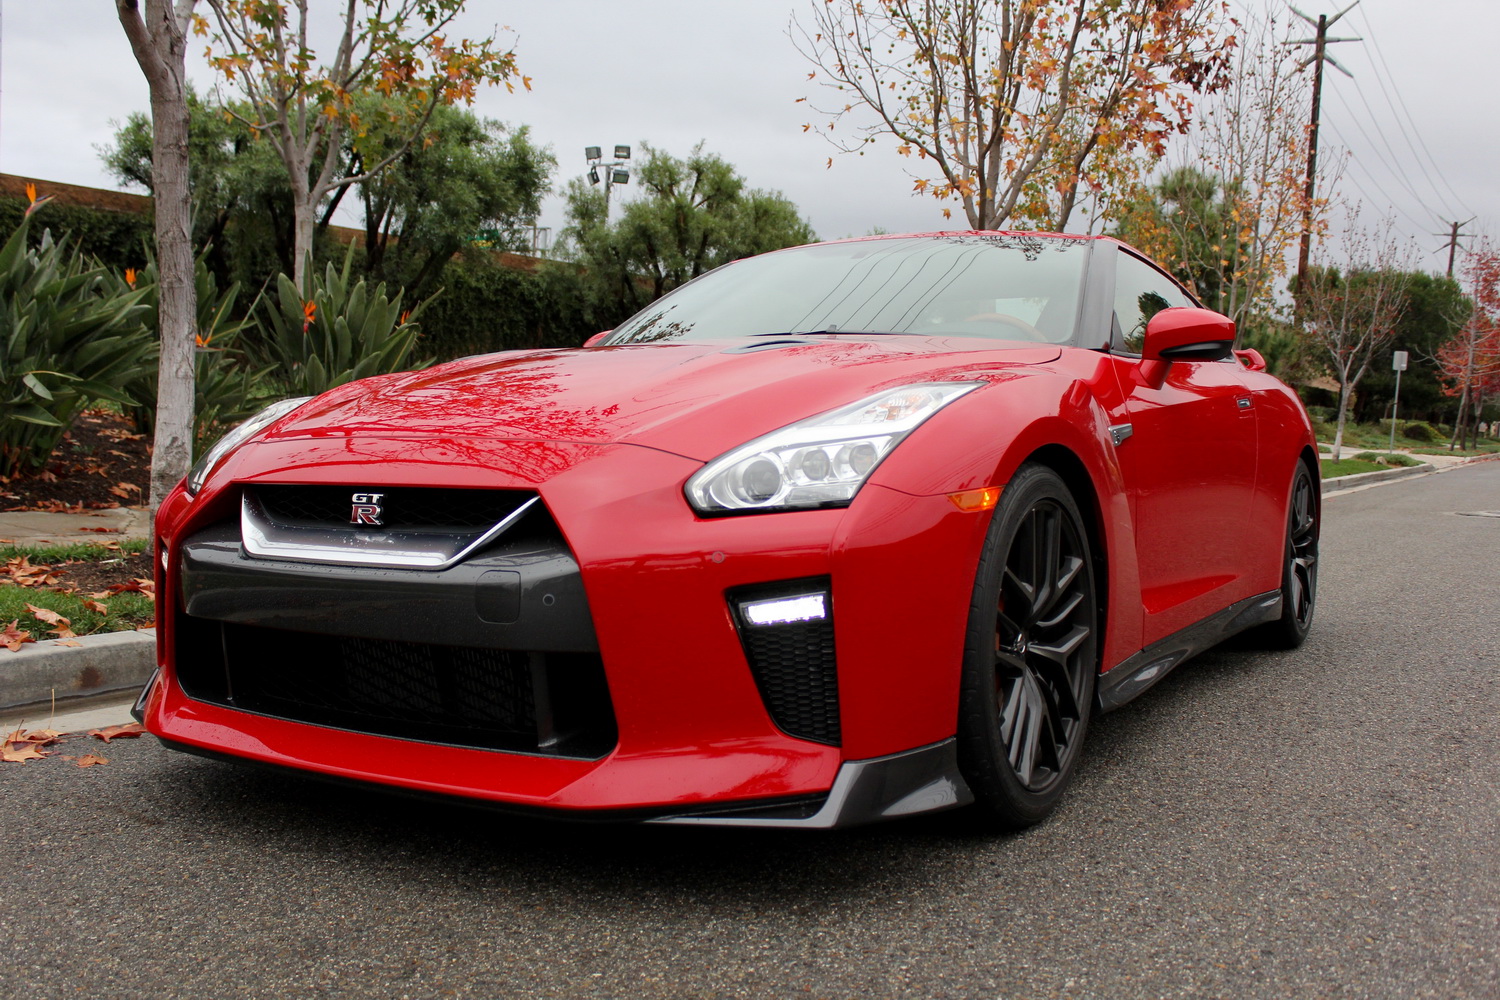 2020 Nissan GT-R Nismo Review  Power, Performance And Handling